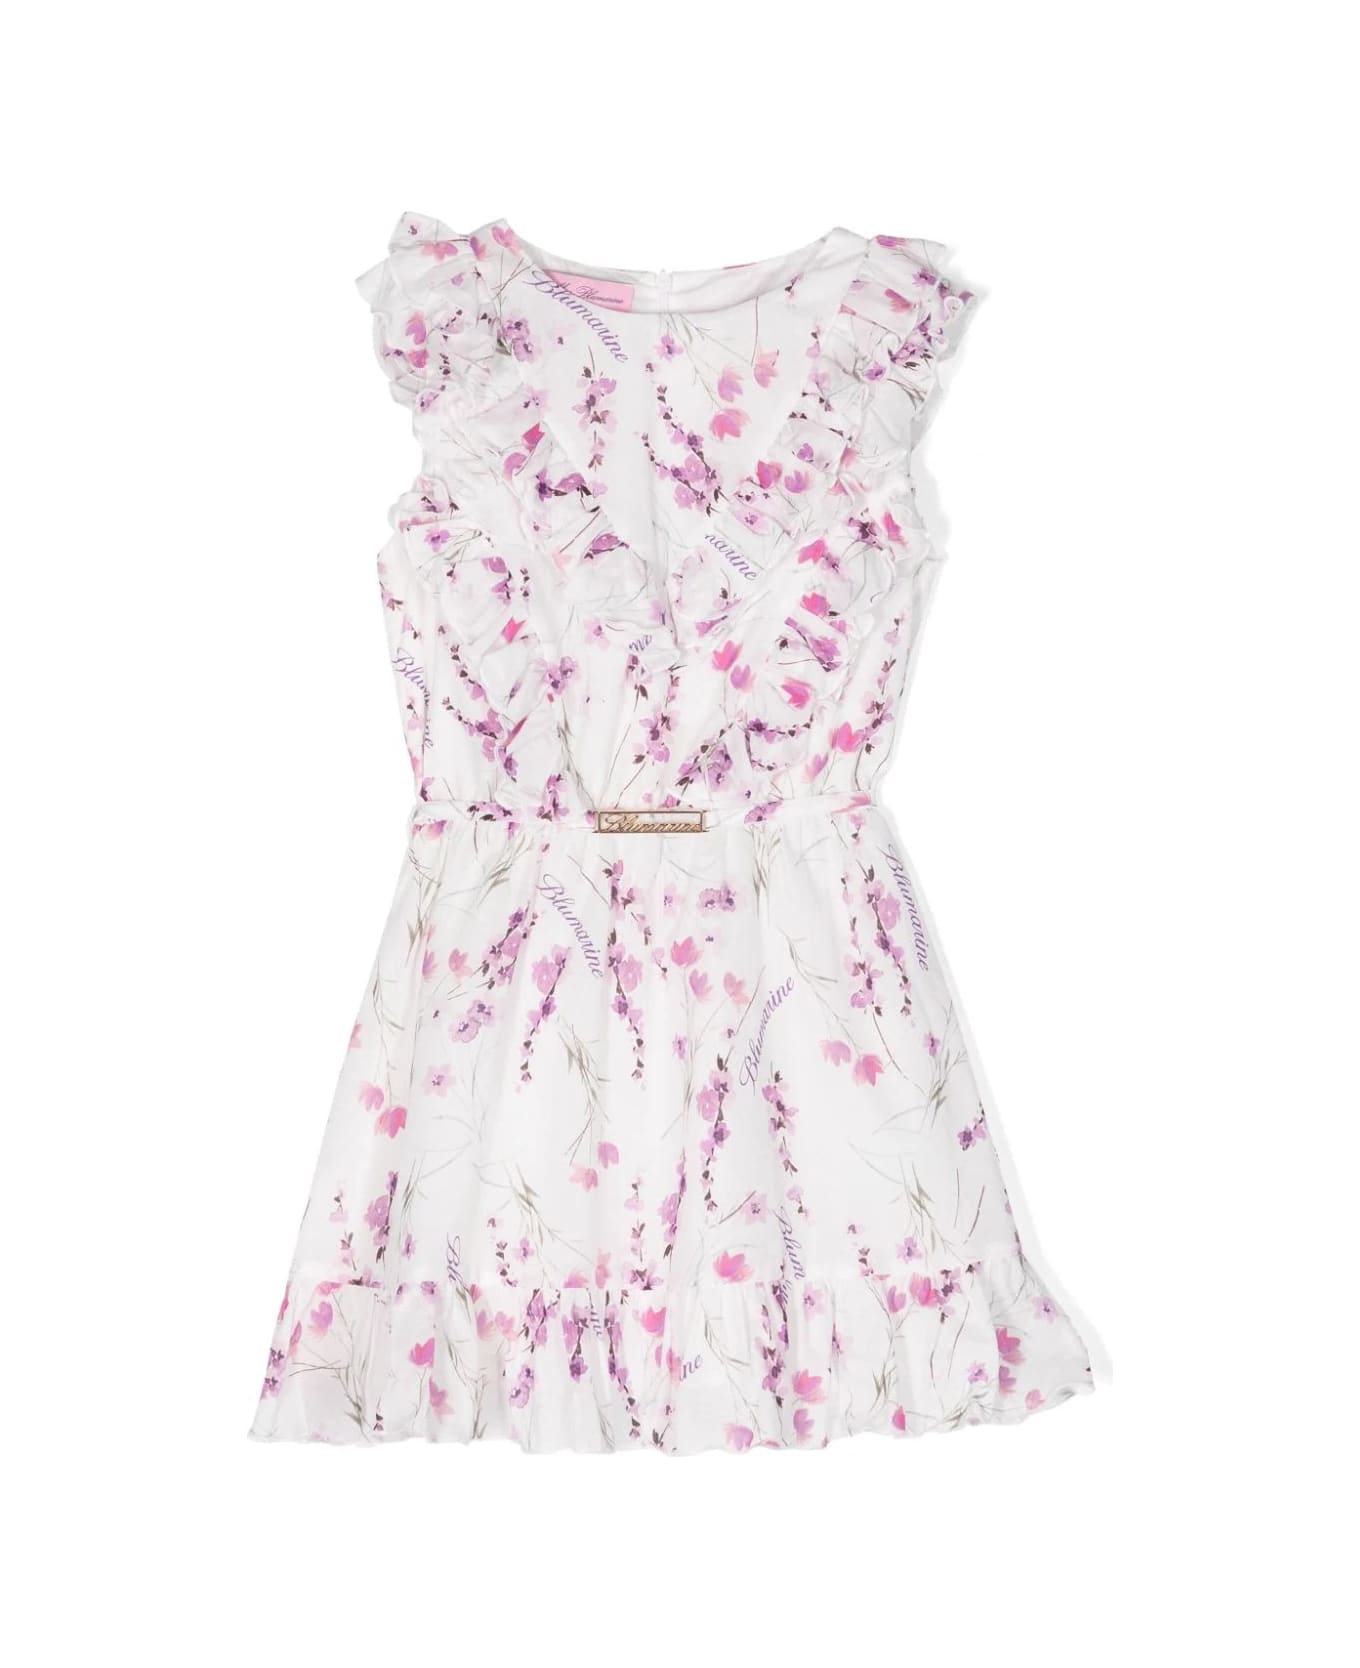 Miss Blumarine White Dress With Ruffles And Floral Print - WHITE ワンピース＆ドレス